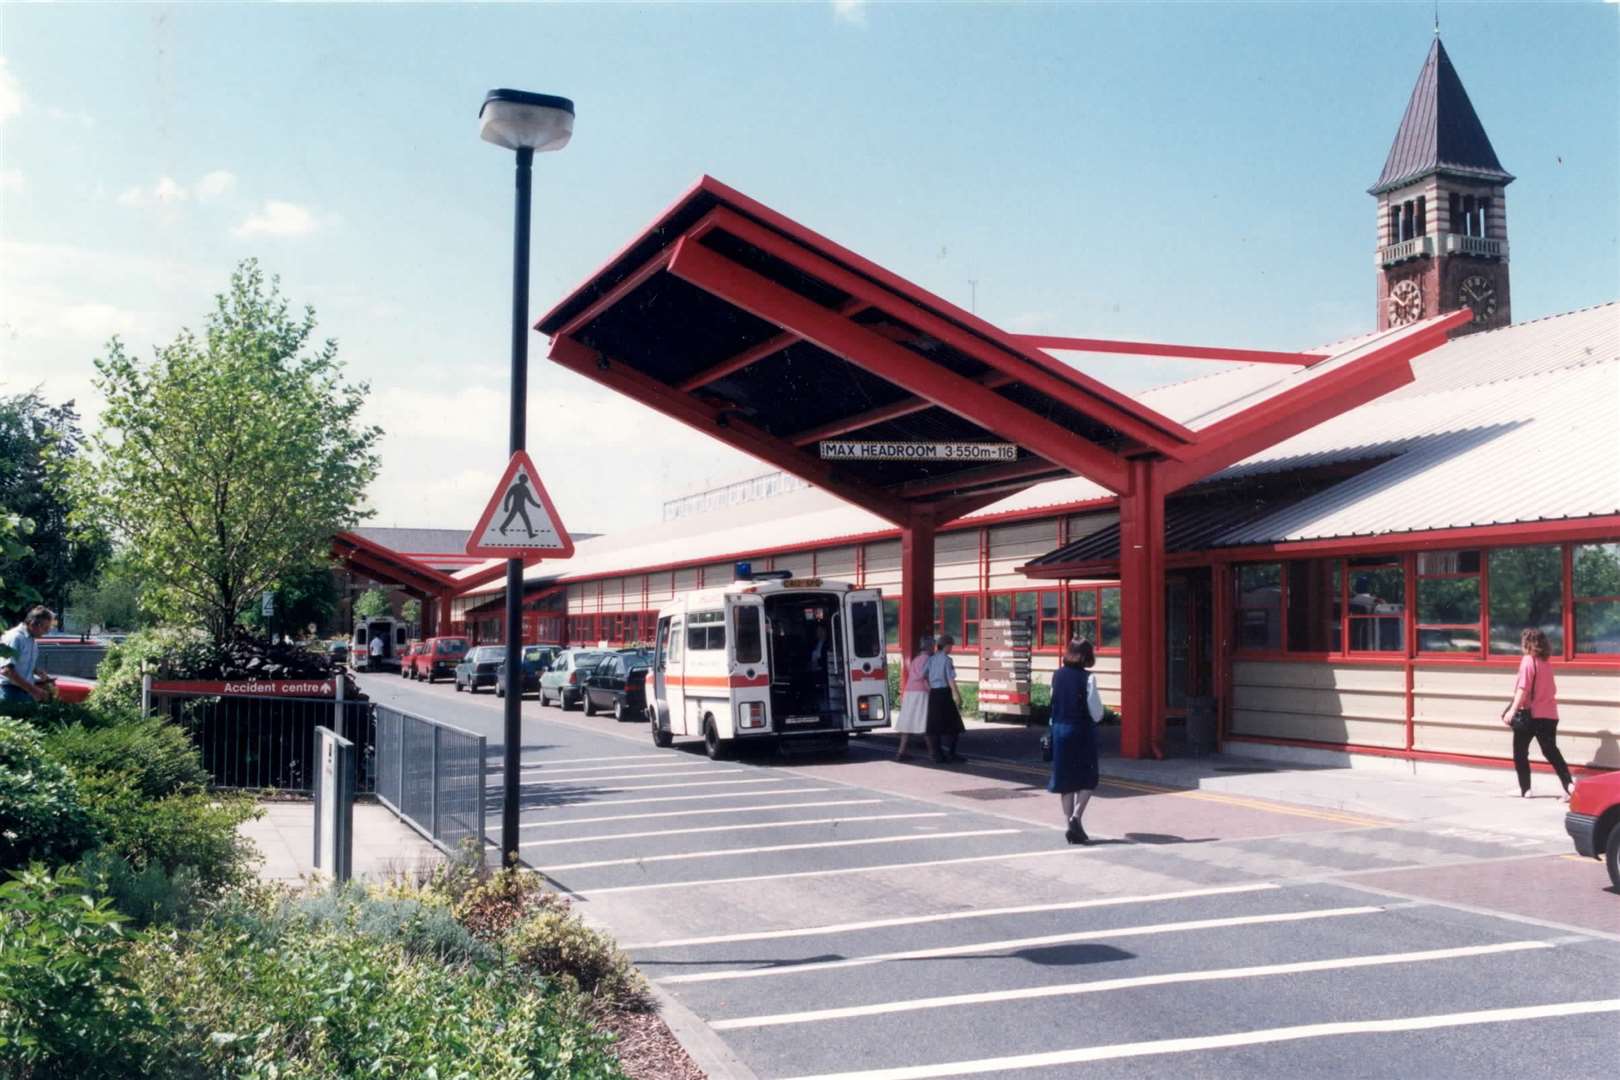 The new entrance at Medway Hospital in 1993 – it's still there today